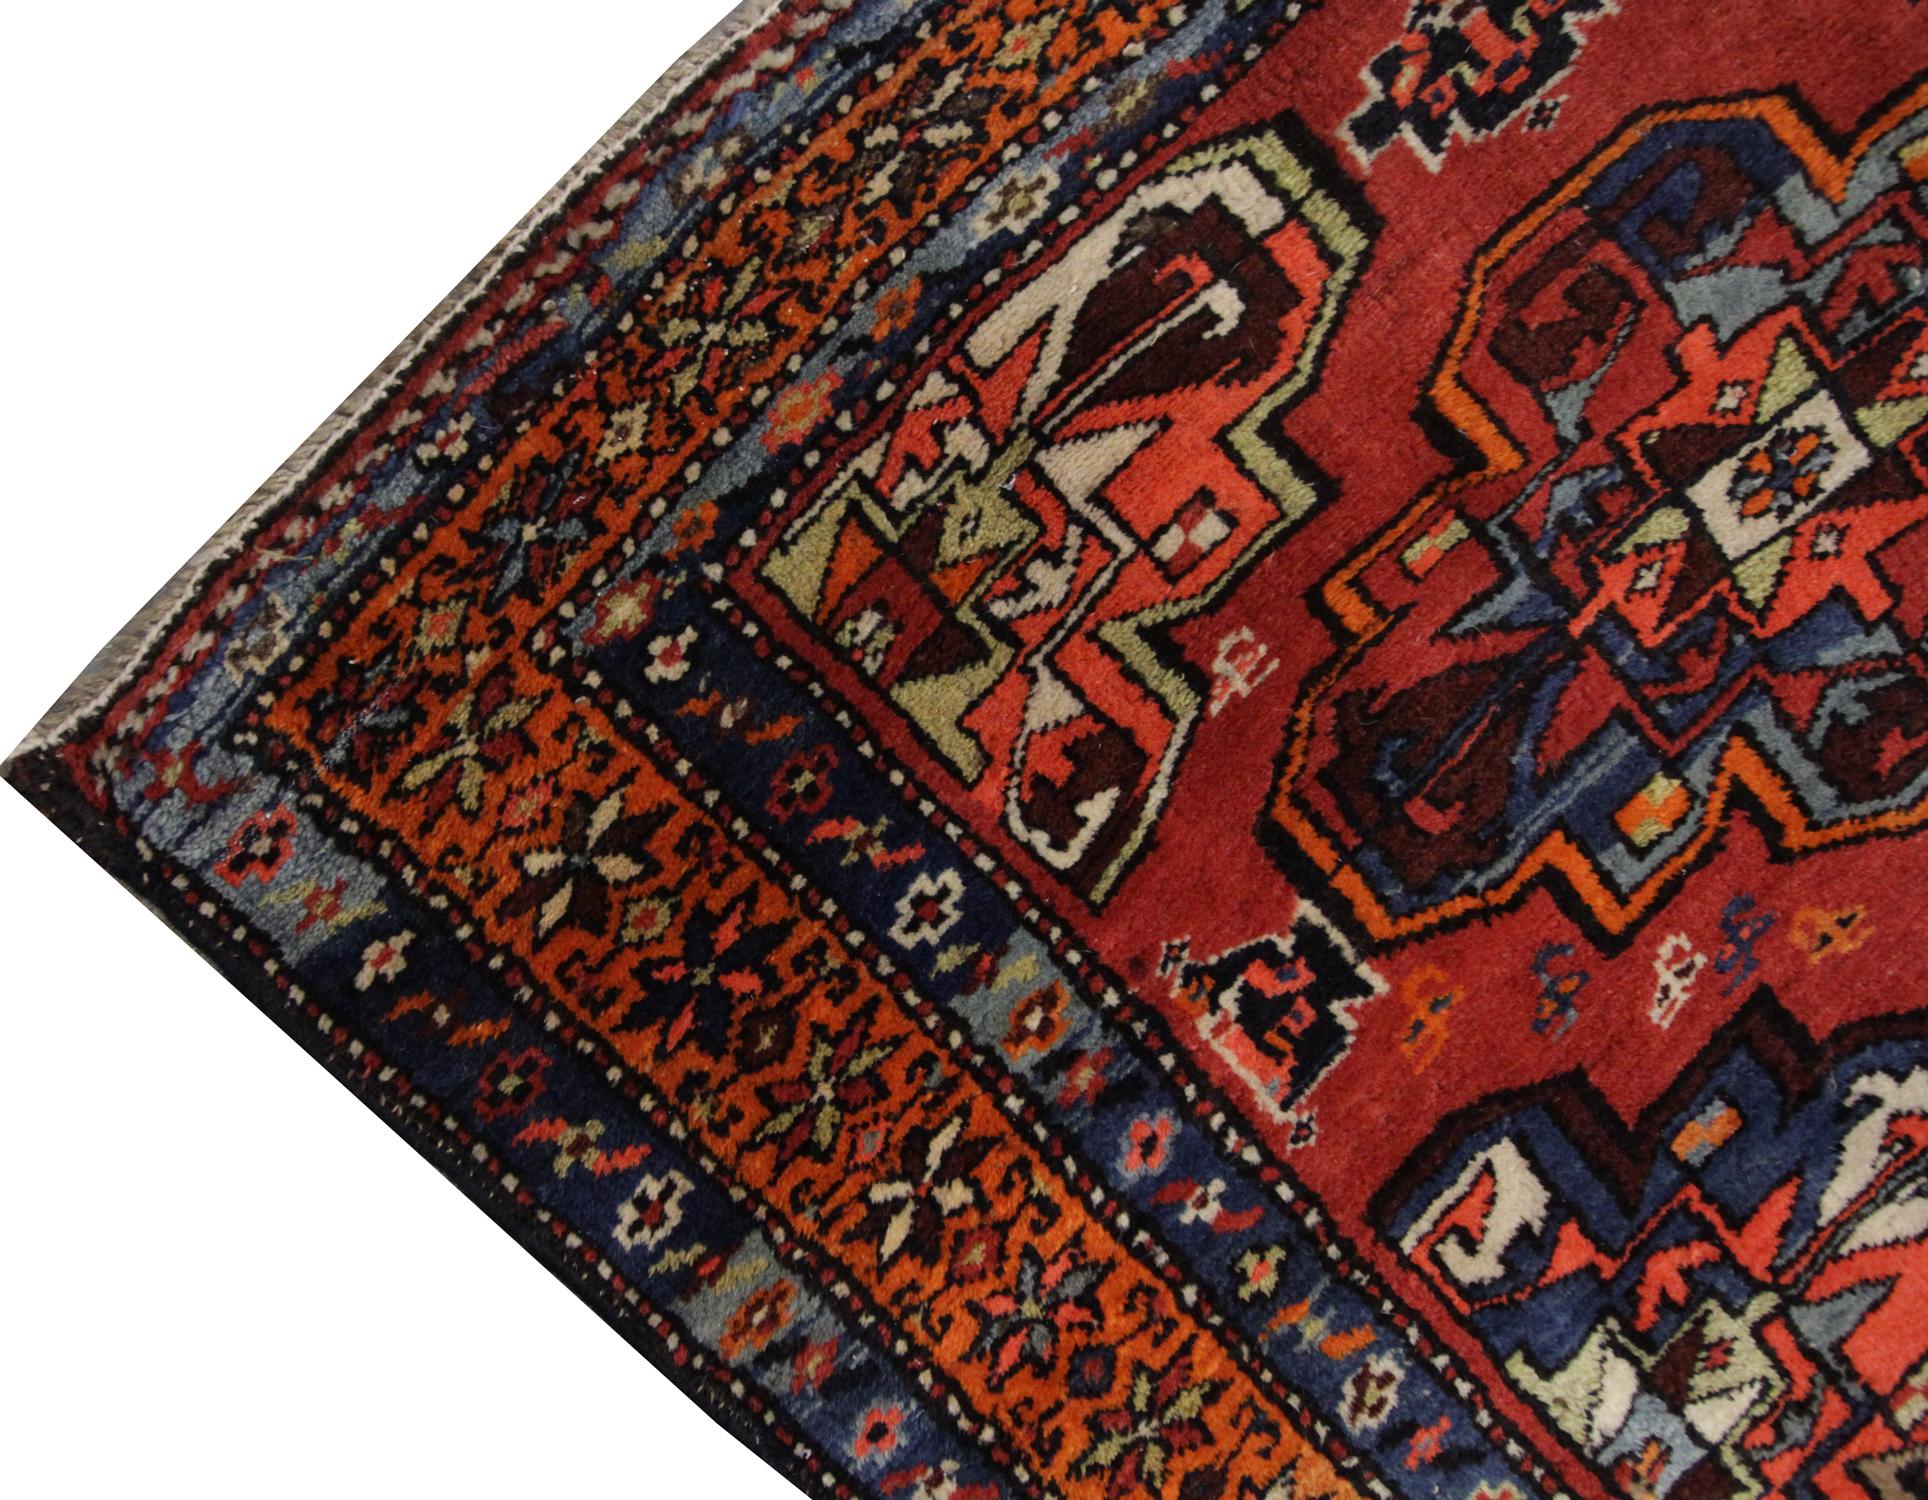 A handmade carpet with a repeat pattern of geometric designs flows through the center of this Oriental rug, with colours of green, blue and brown softly contrasting against the deep orange background, enclosed with a repeat motif border. Rich in